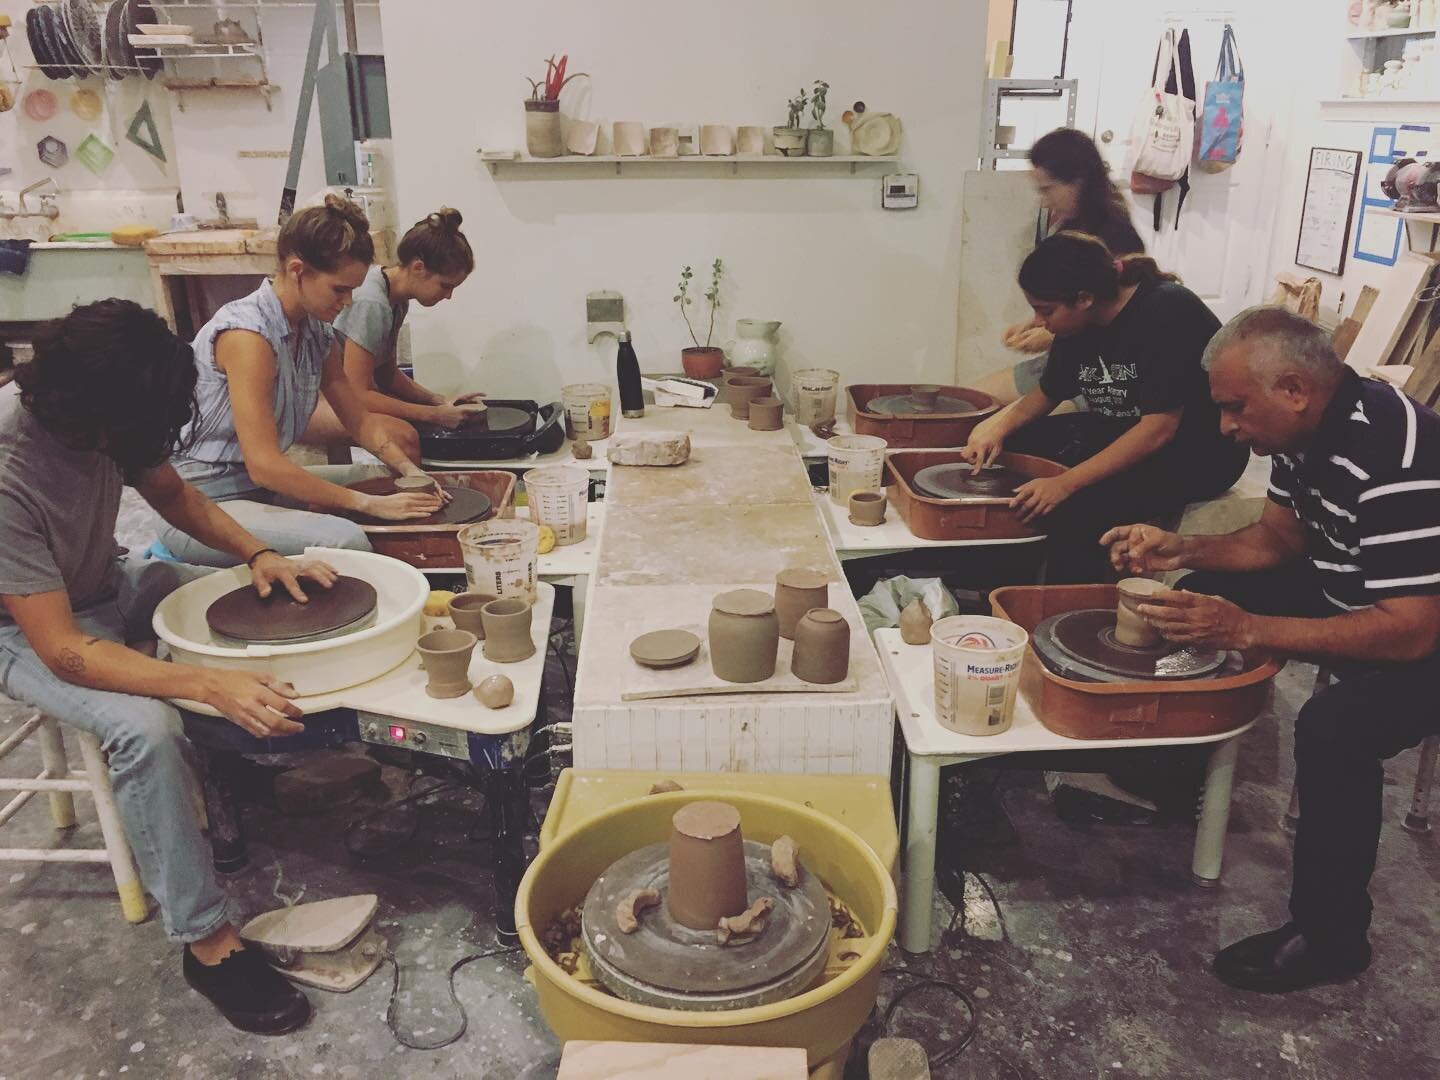 In our old space we could only host 3 classes per week since the studio was one big room shared by members and classes and we didn&rsquo;t want to limit member access too much. They sold out like 🫰 that, which was great for filling up registration b